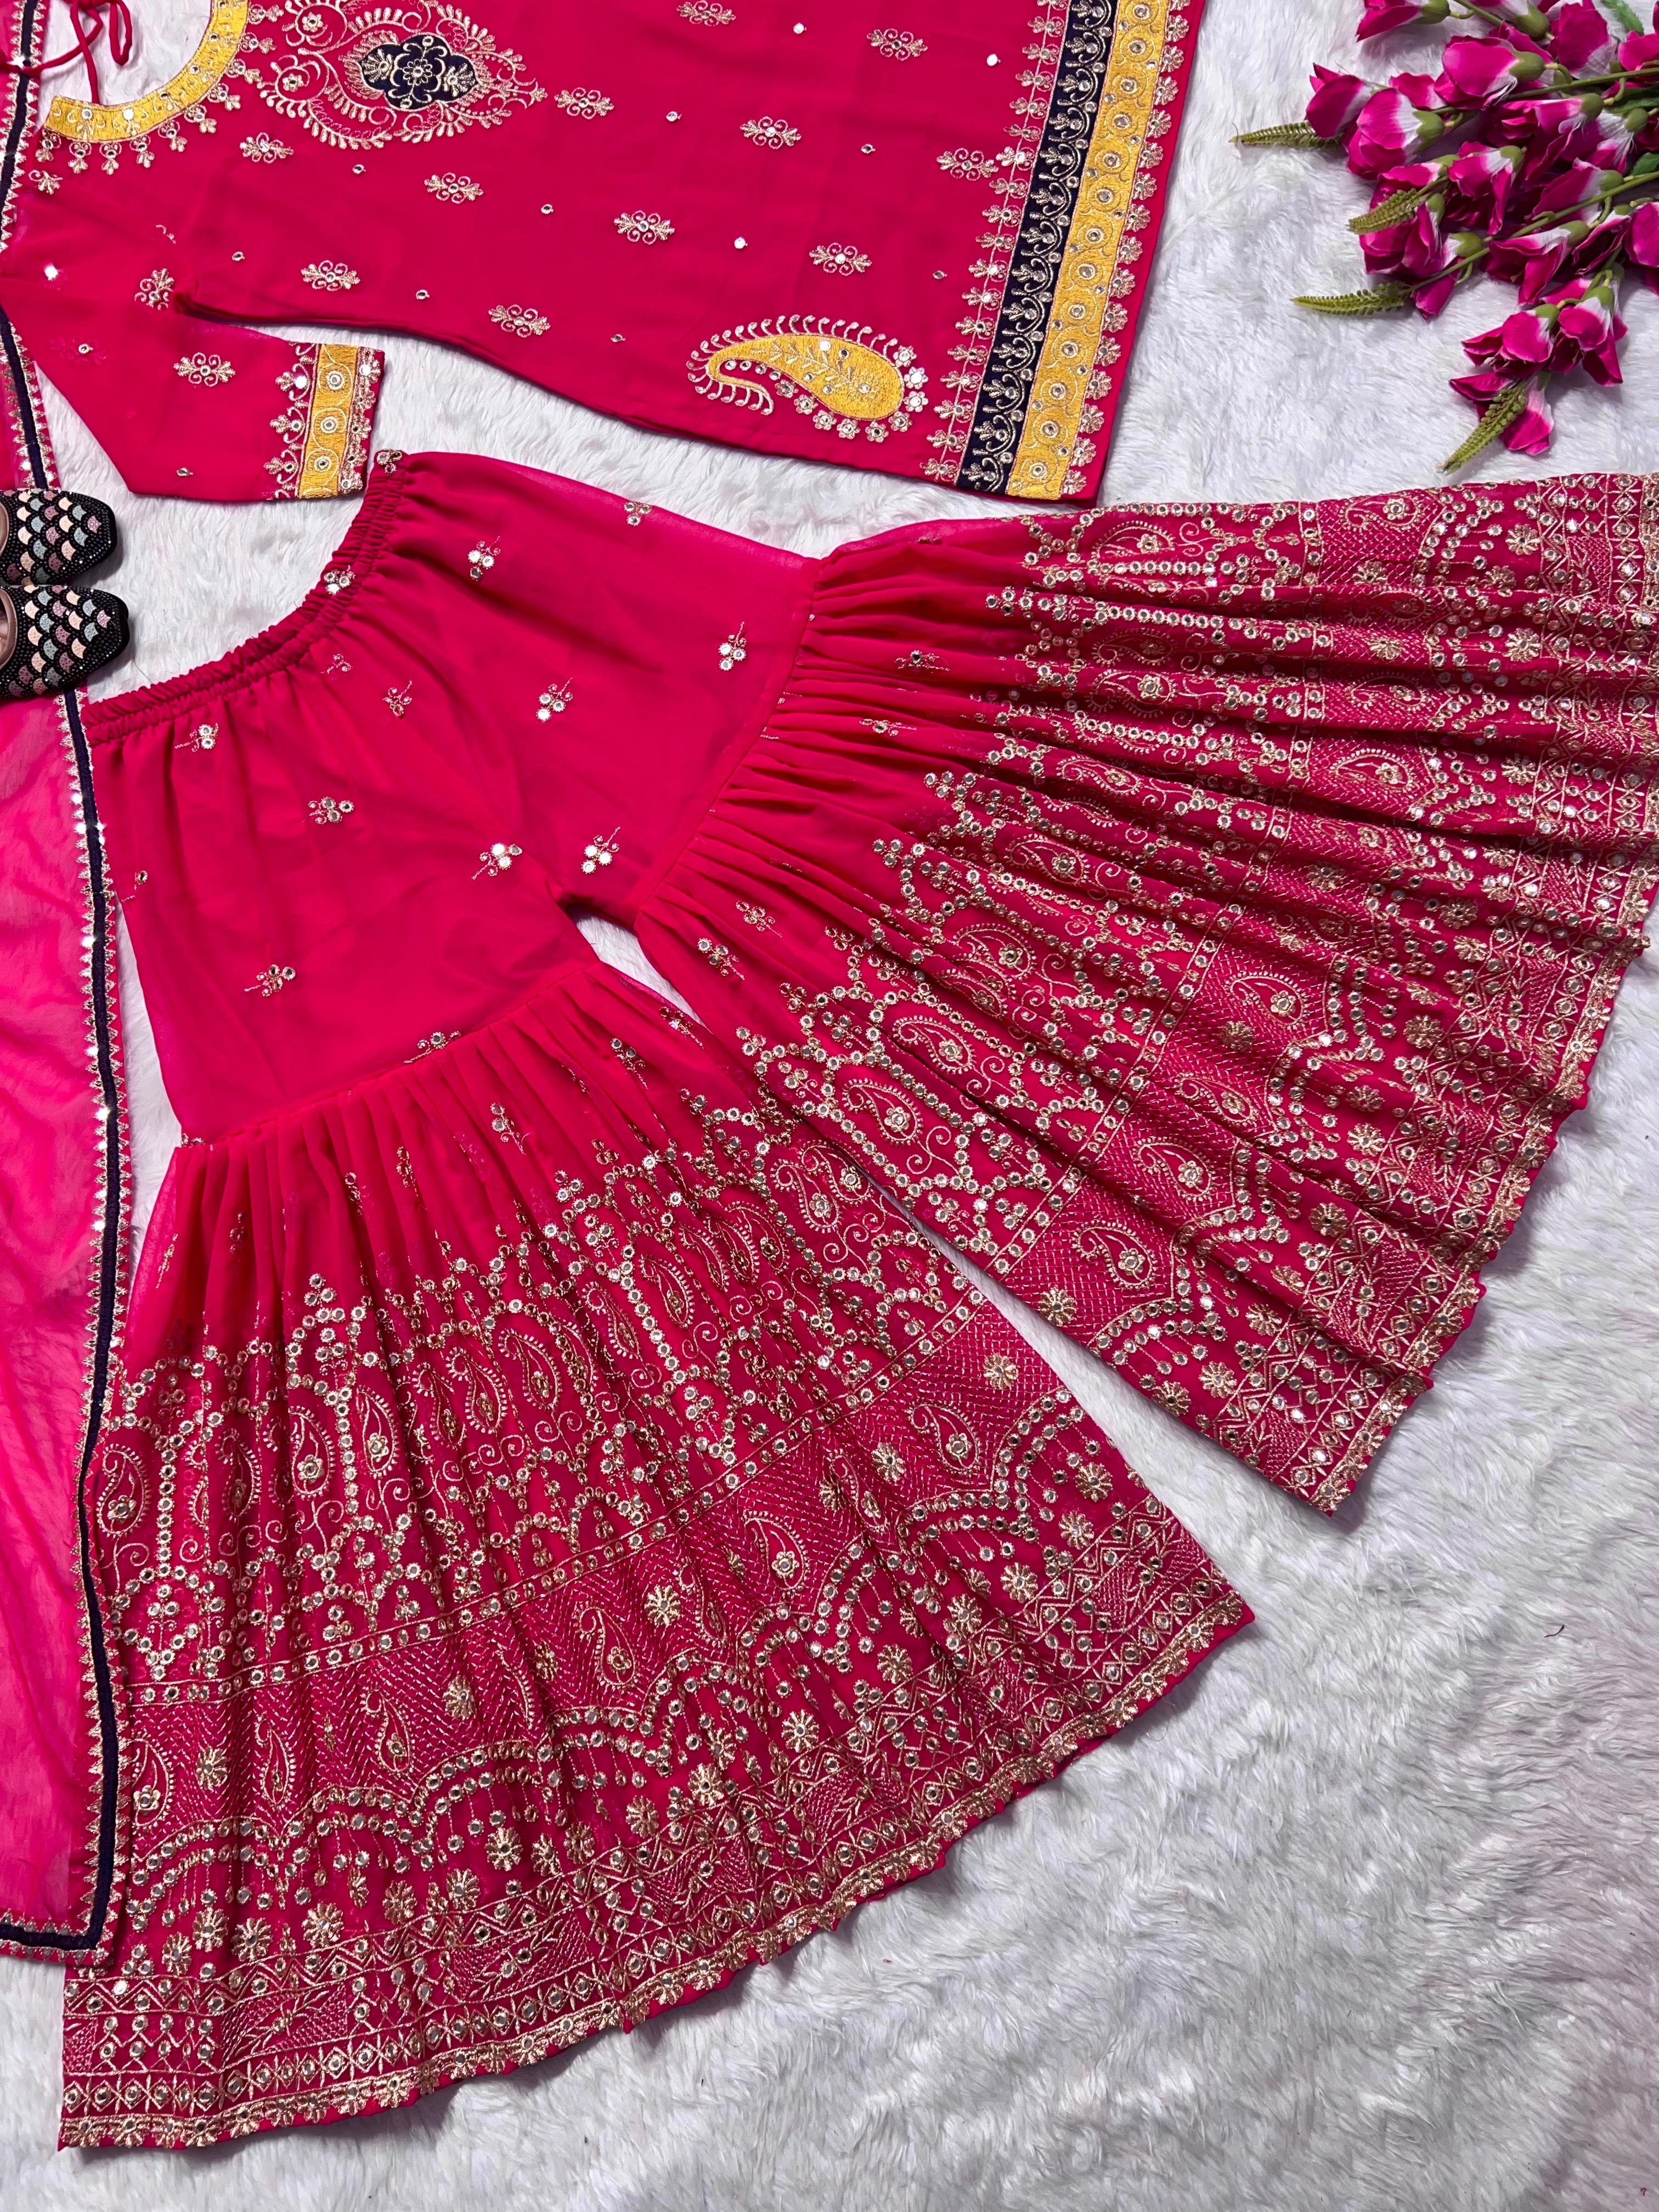 Awesome Multi Embroidery Work Pink Color Sharara Suit